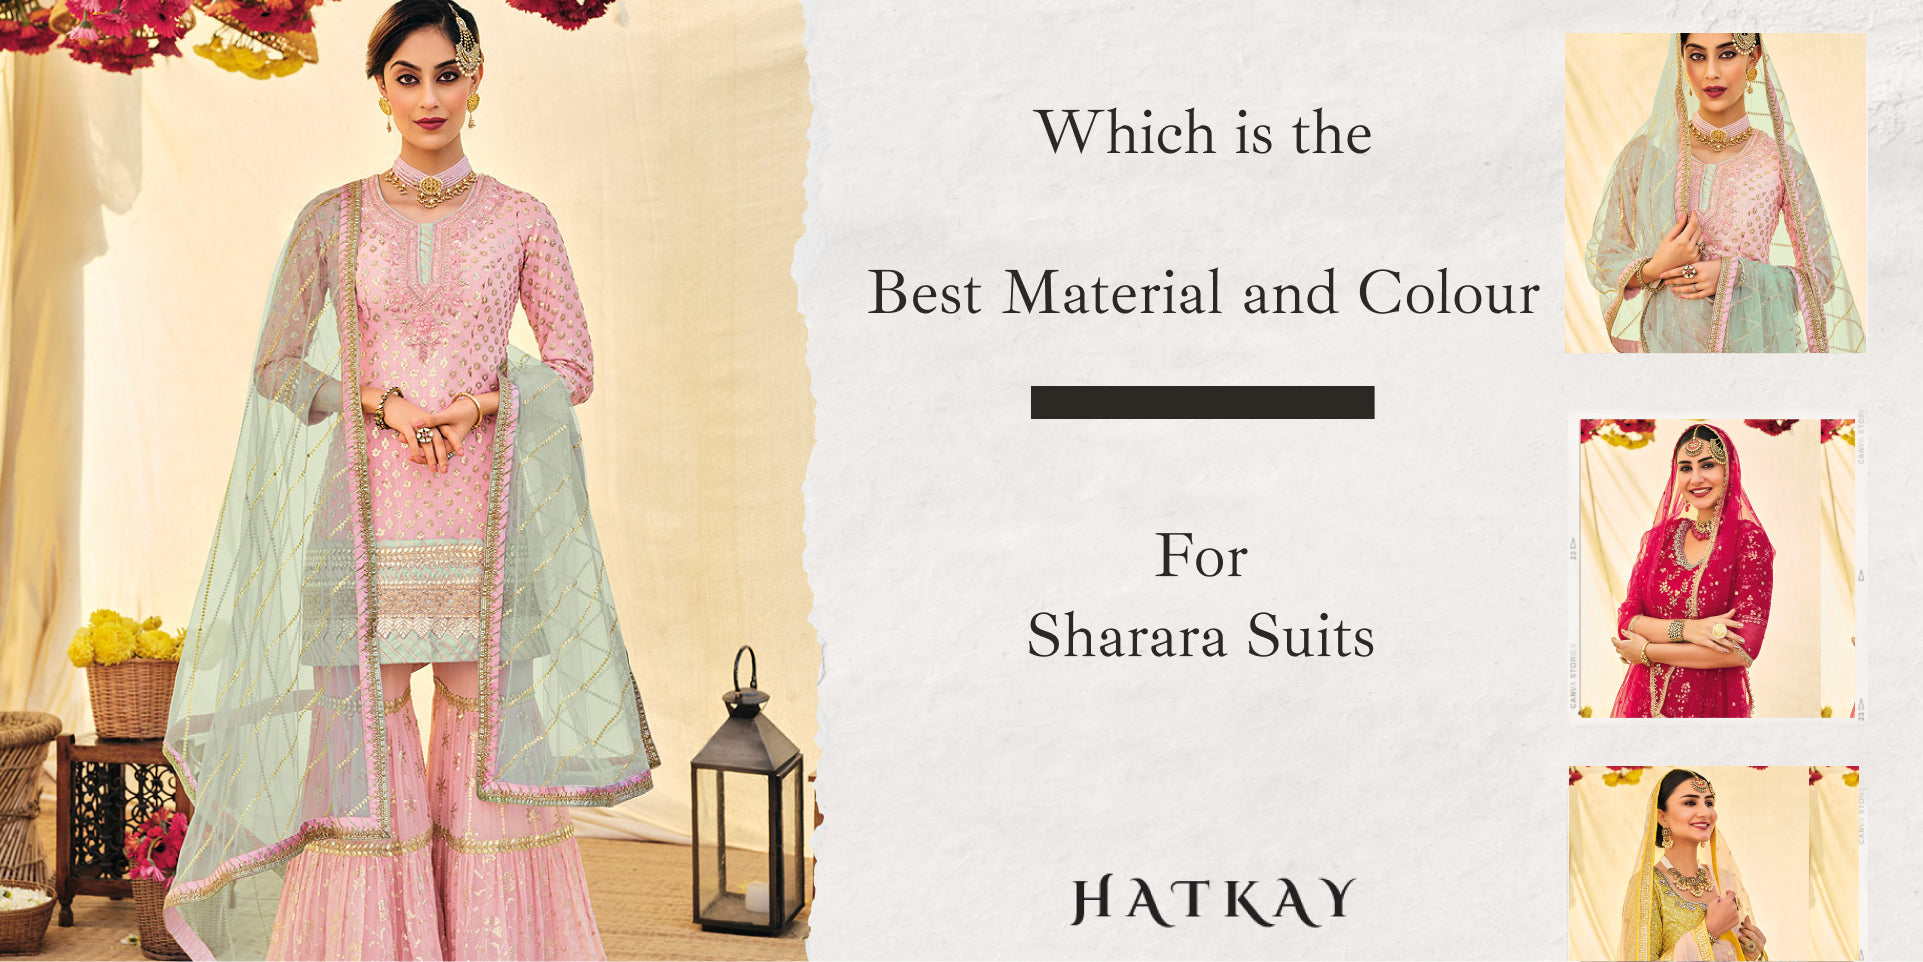 Which is the Best Material and Colour for Sharara Suits?